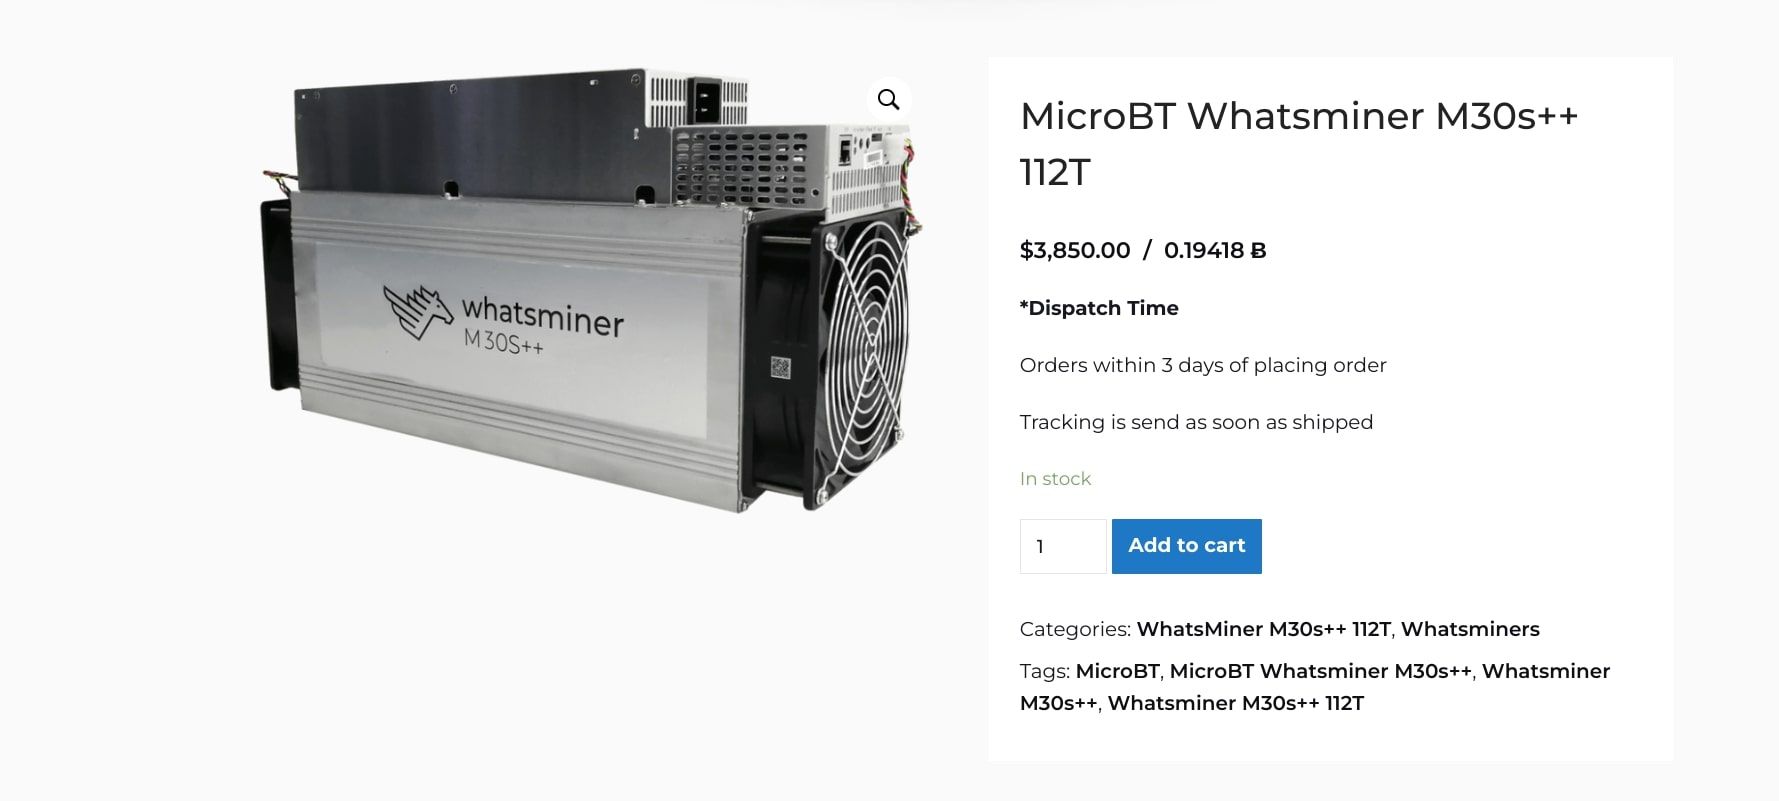 whatsminer m30++ product page screenshot